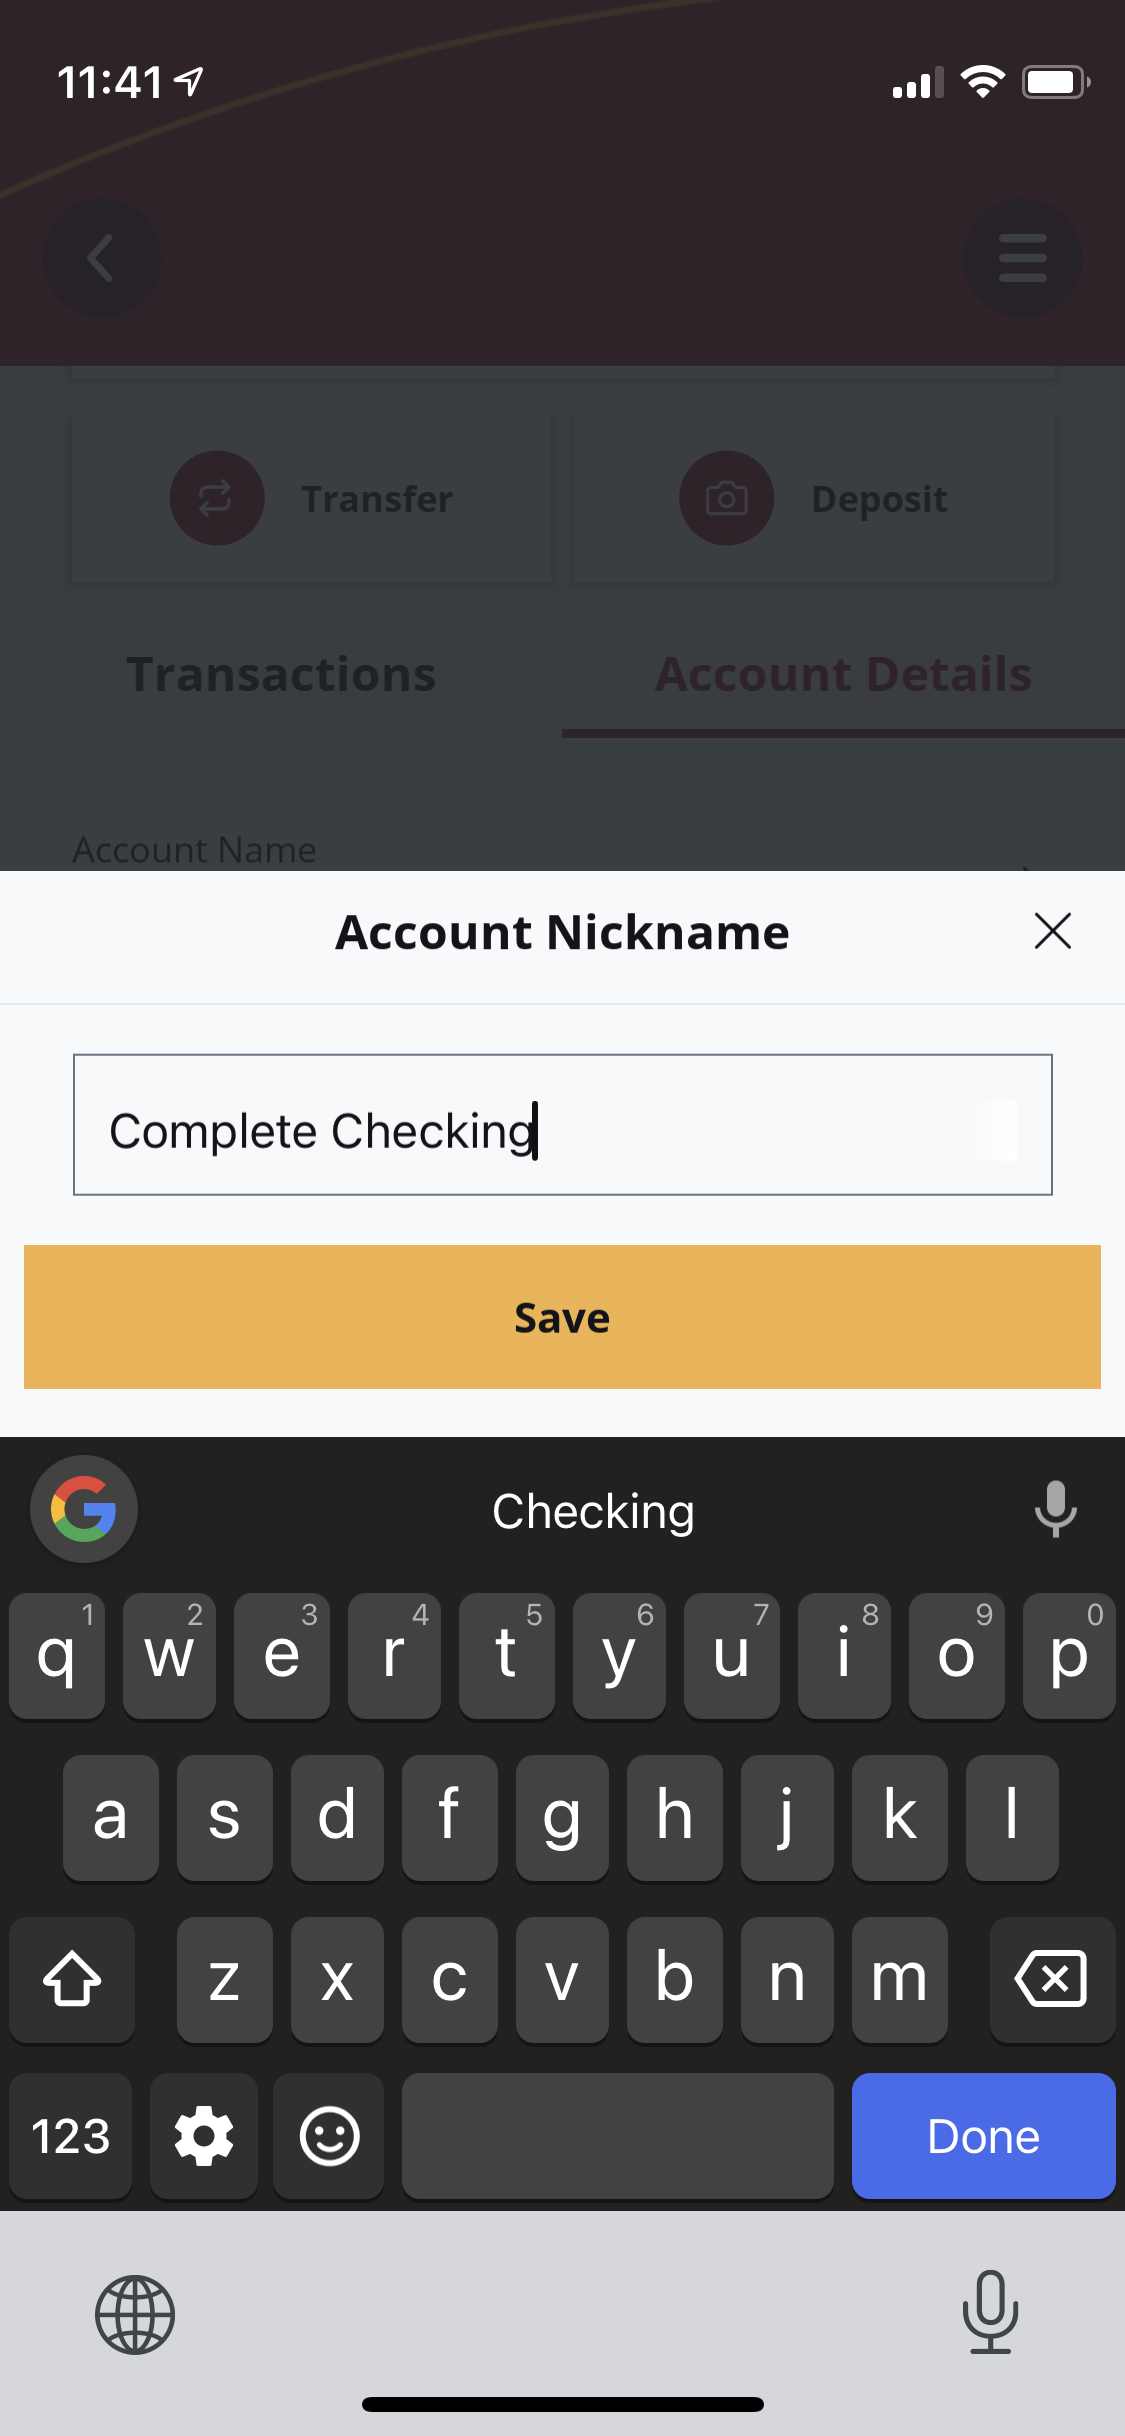 Screen shot showing account nickname on mobile